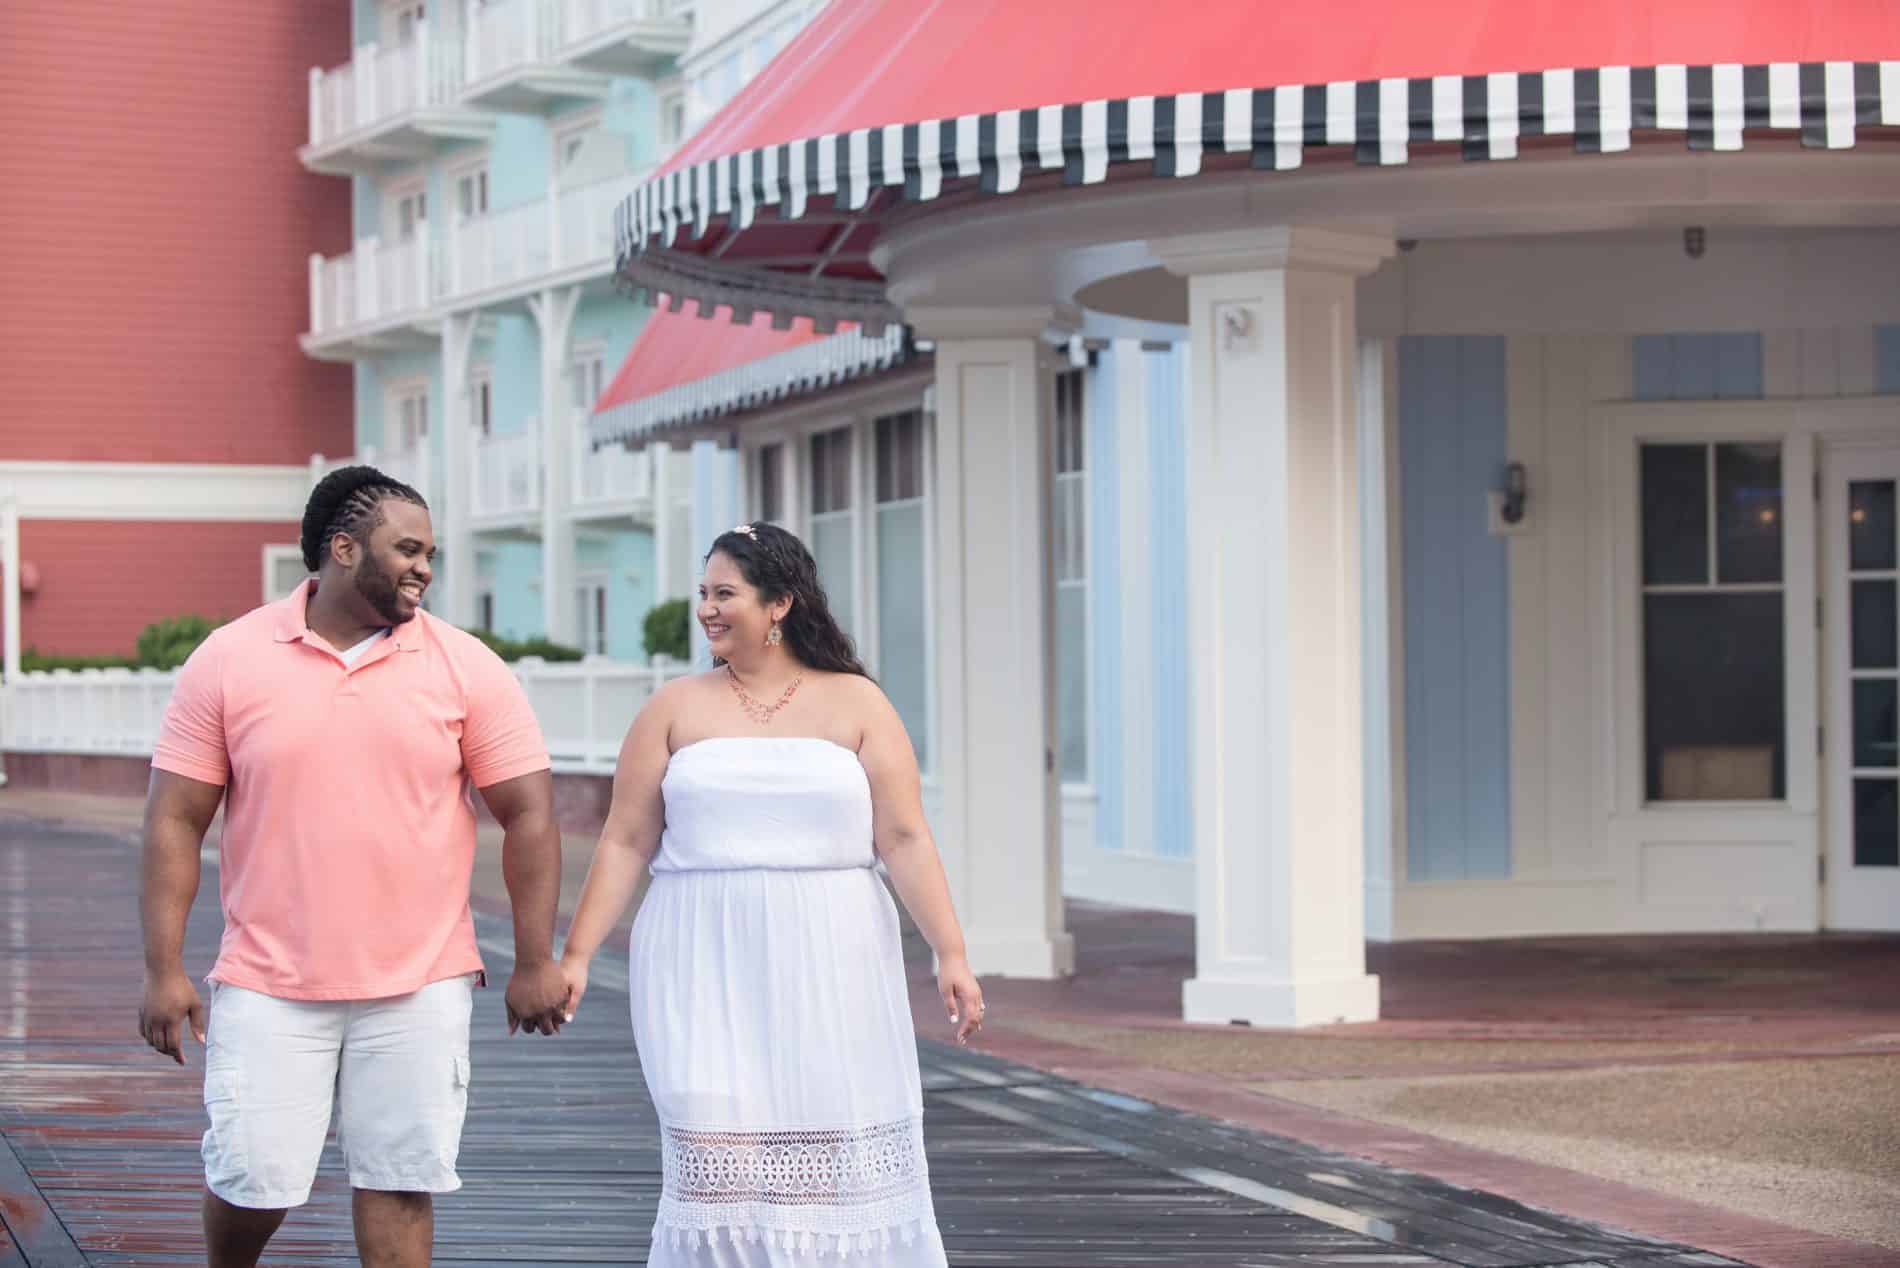 Disneys-Boardwalk-Engagement-Session-Giselle-and-Will 1073